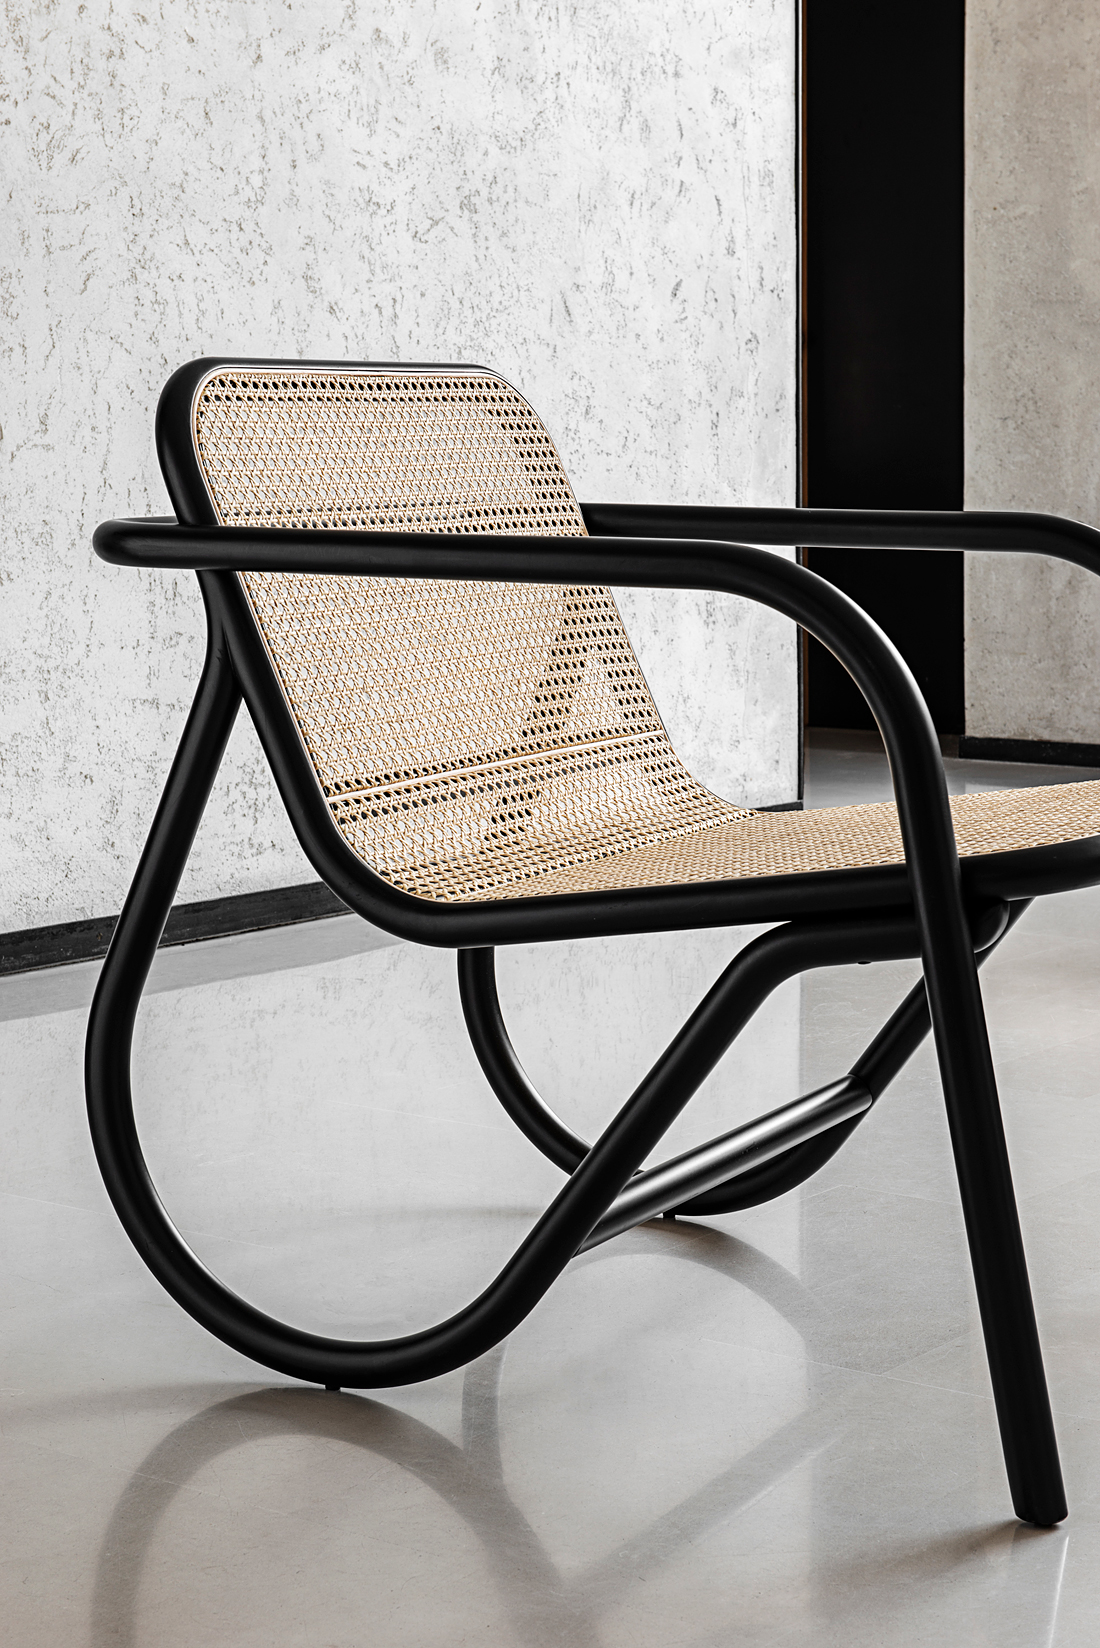 N.2000 Lounge Chair by Michael Anastassiades | DPAGES